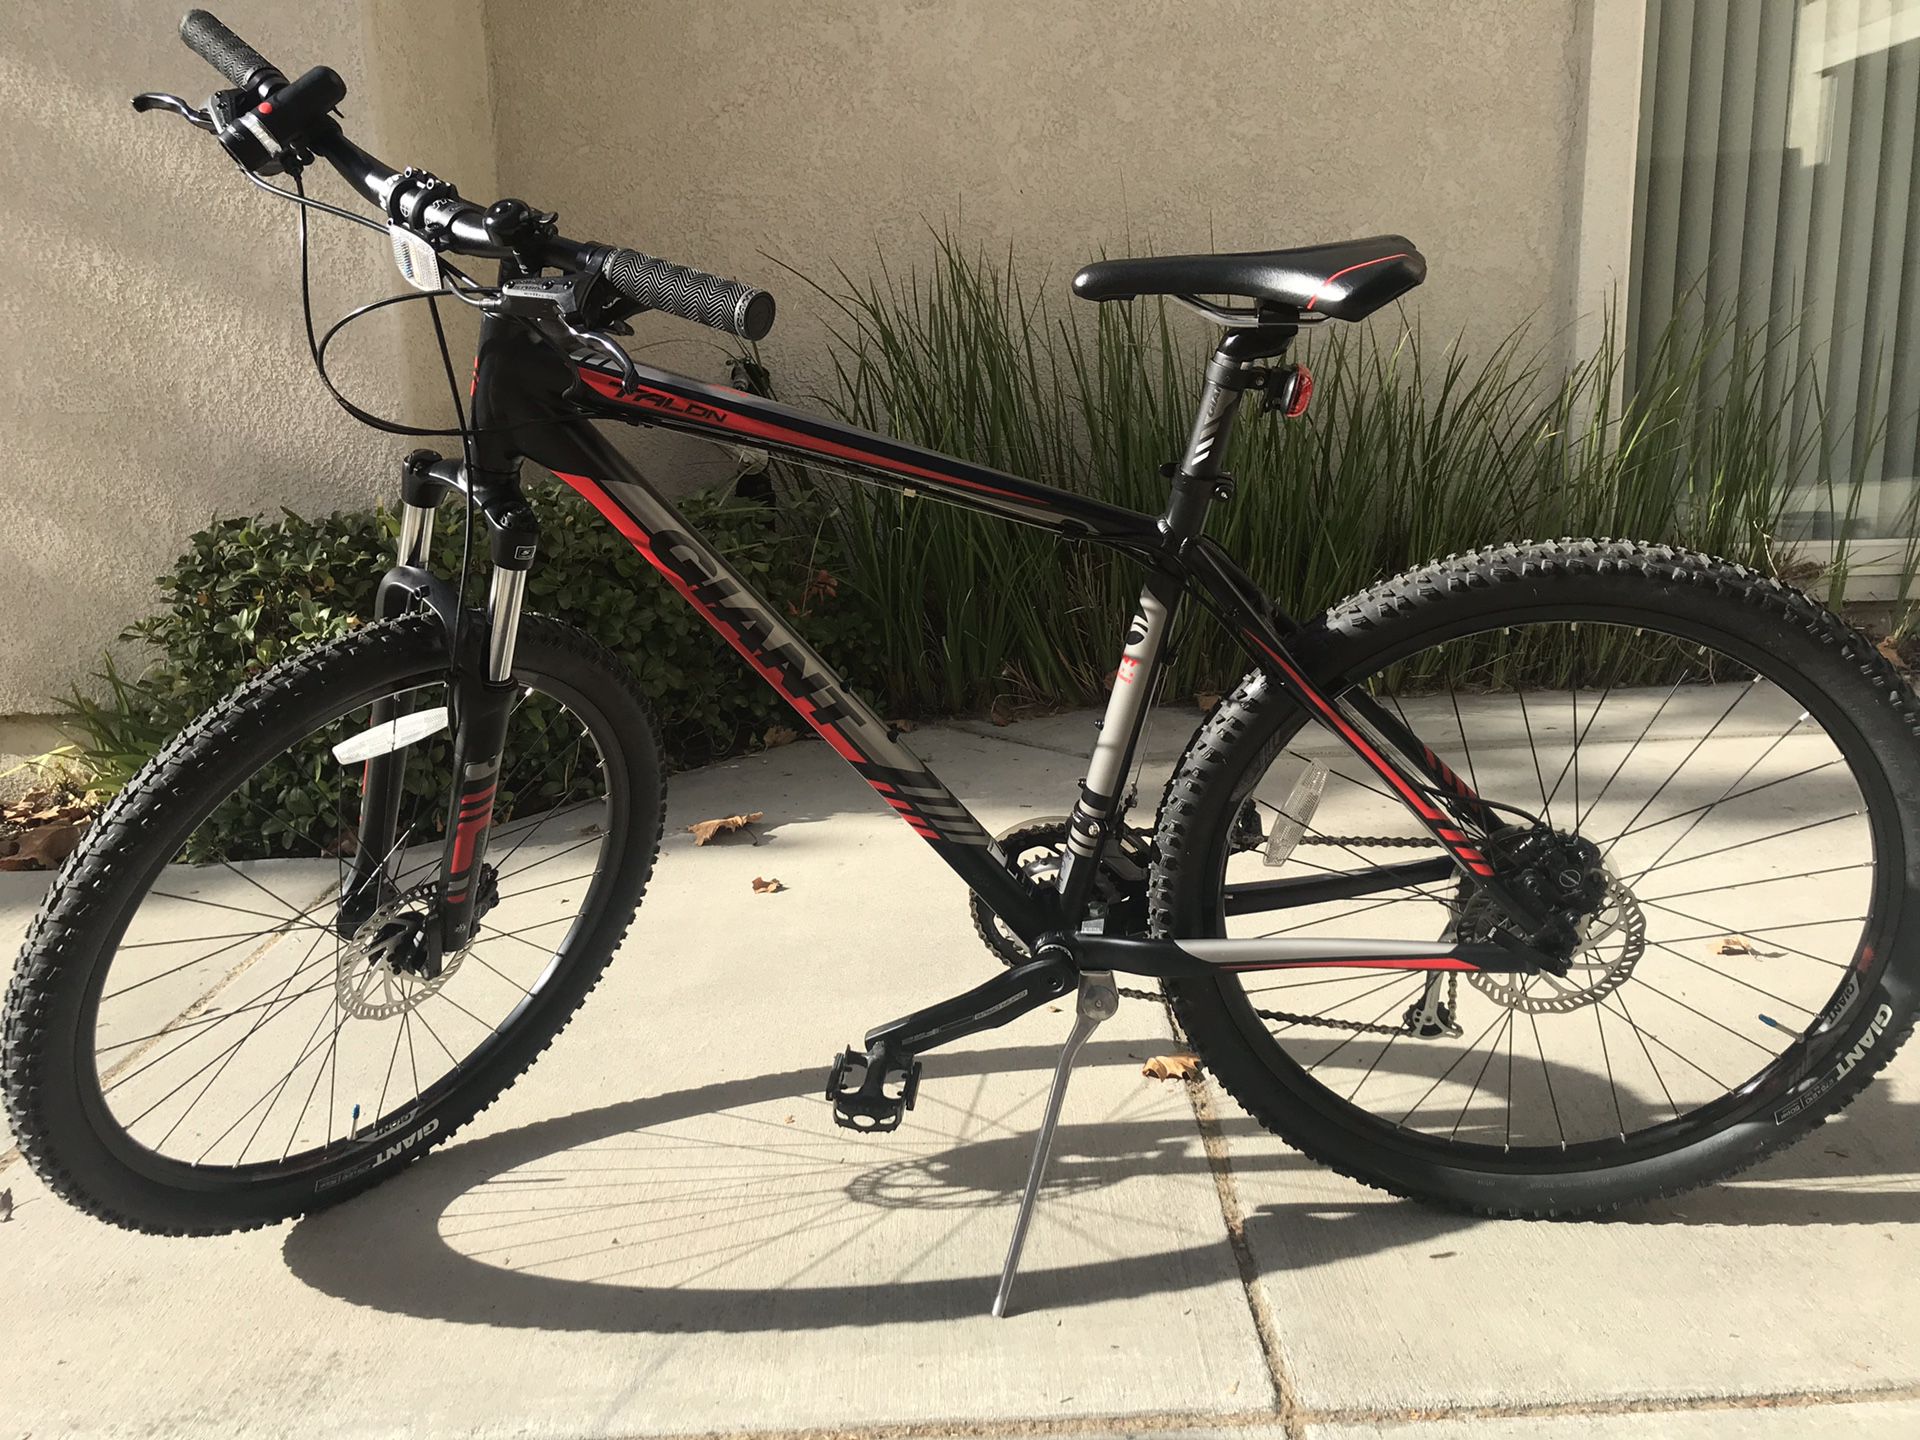 Giant 2014 talon 4 bicycle with accessories